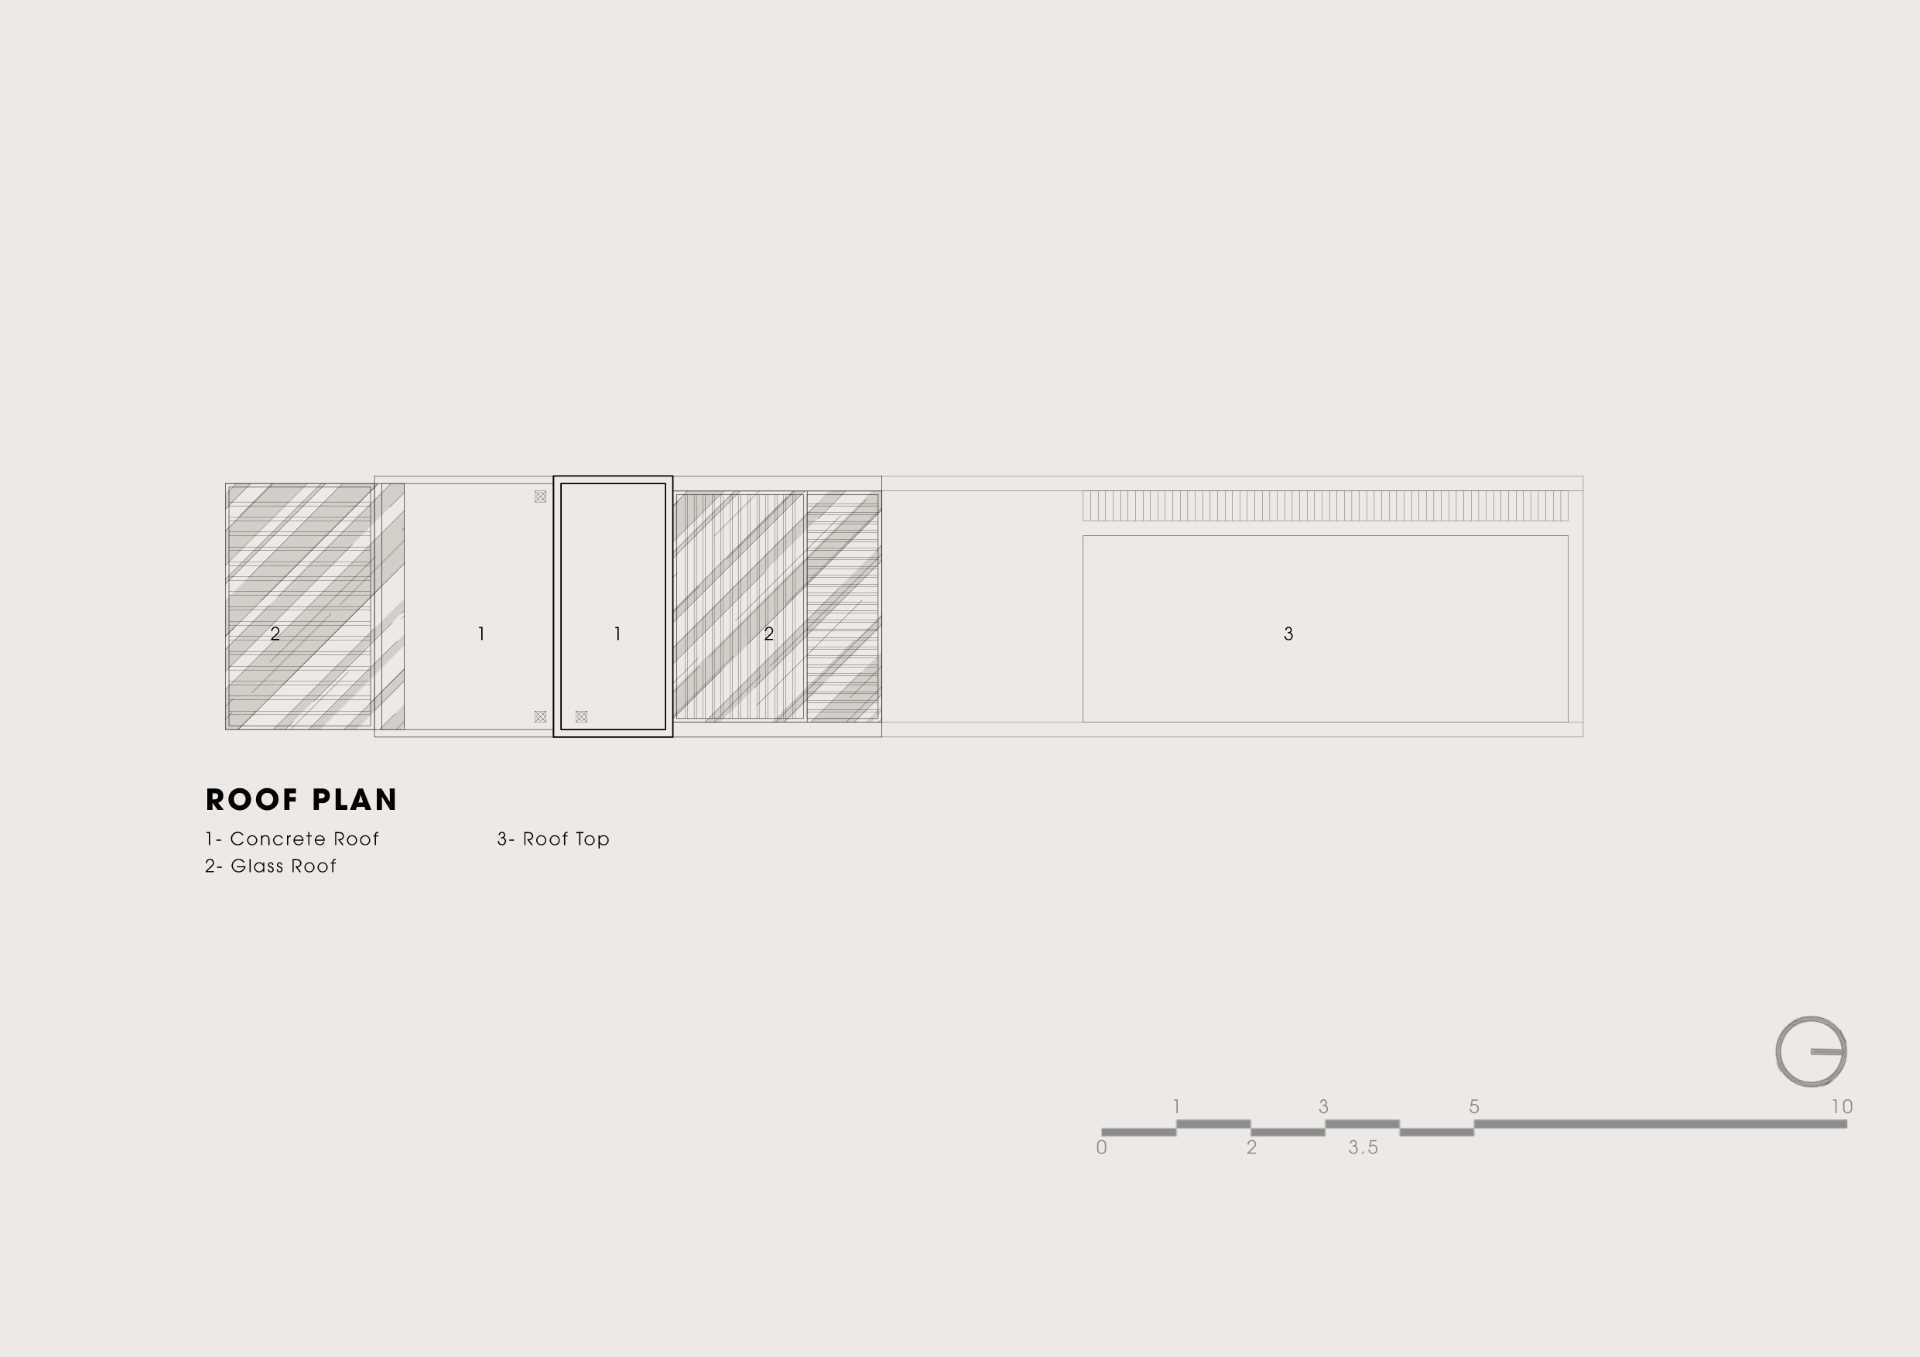 The architectural drawings for a tall and skinny home.